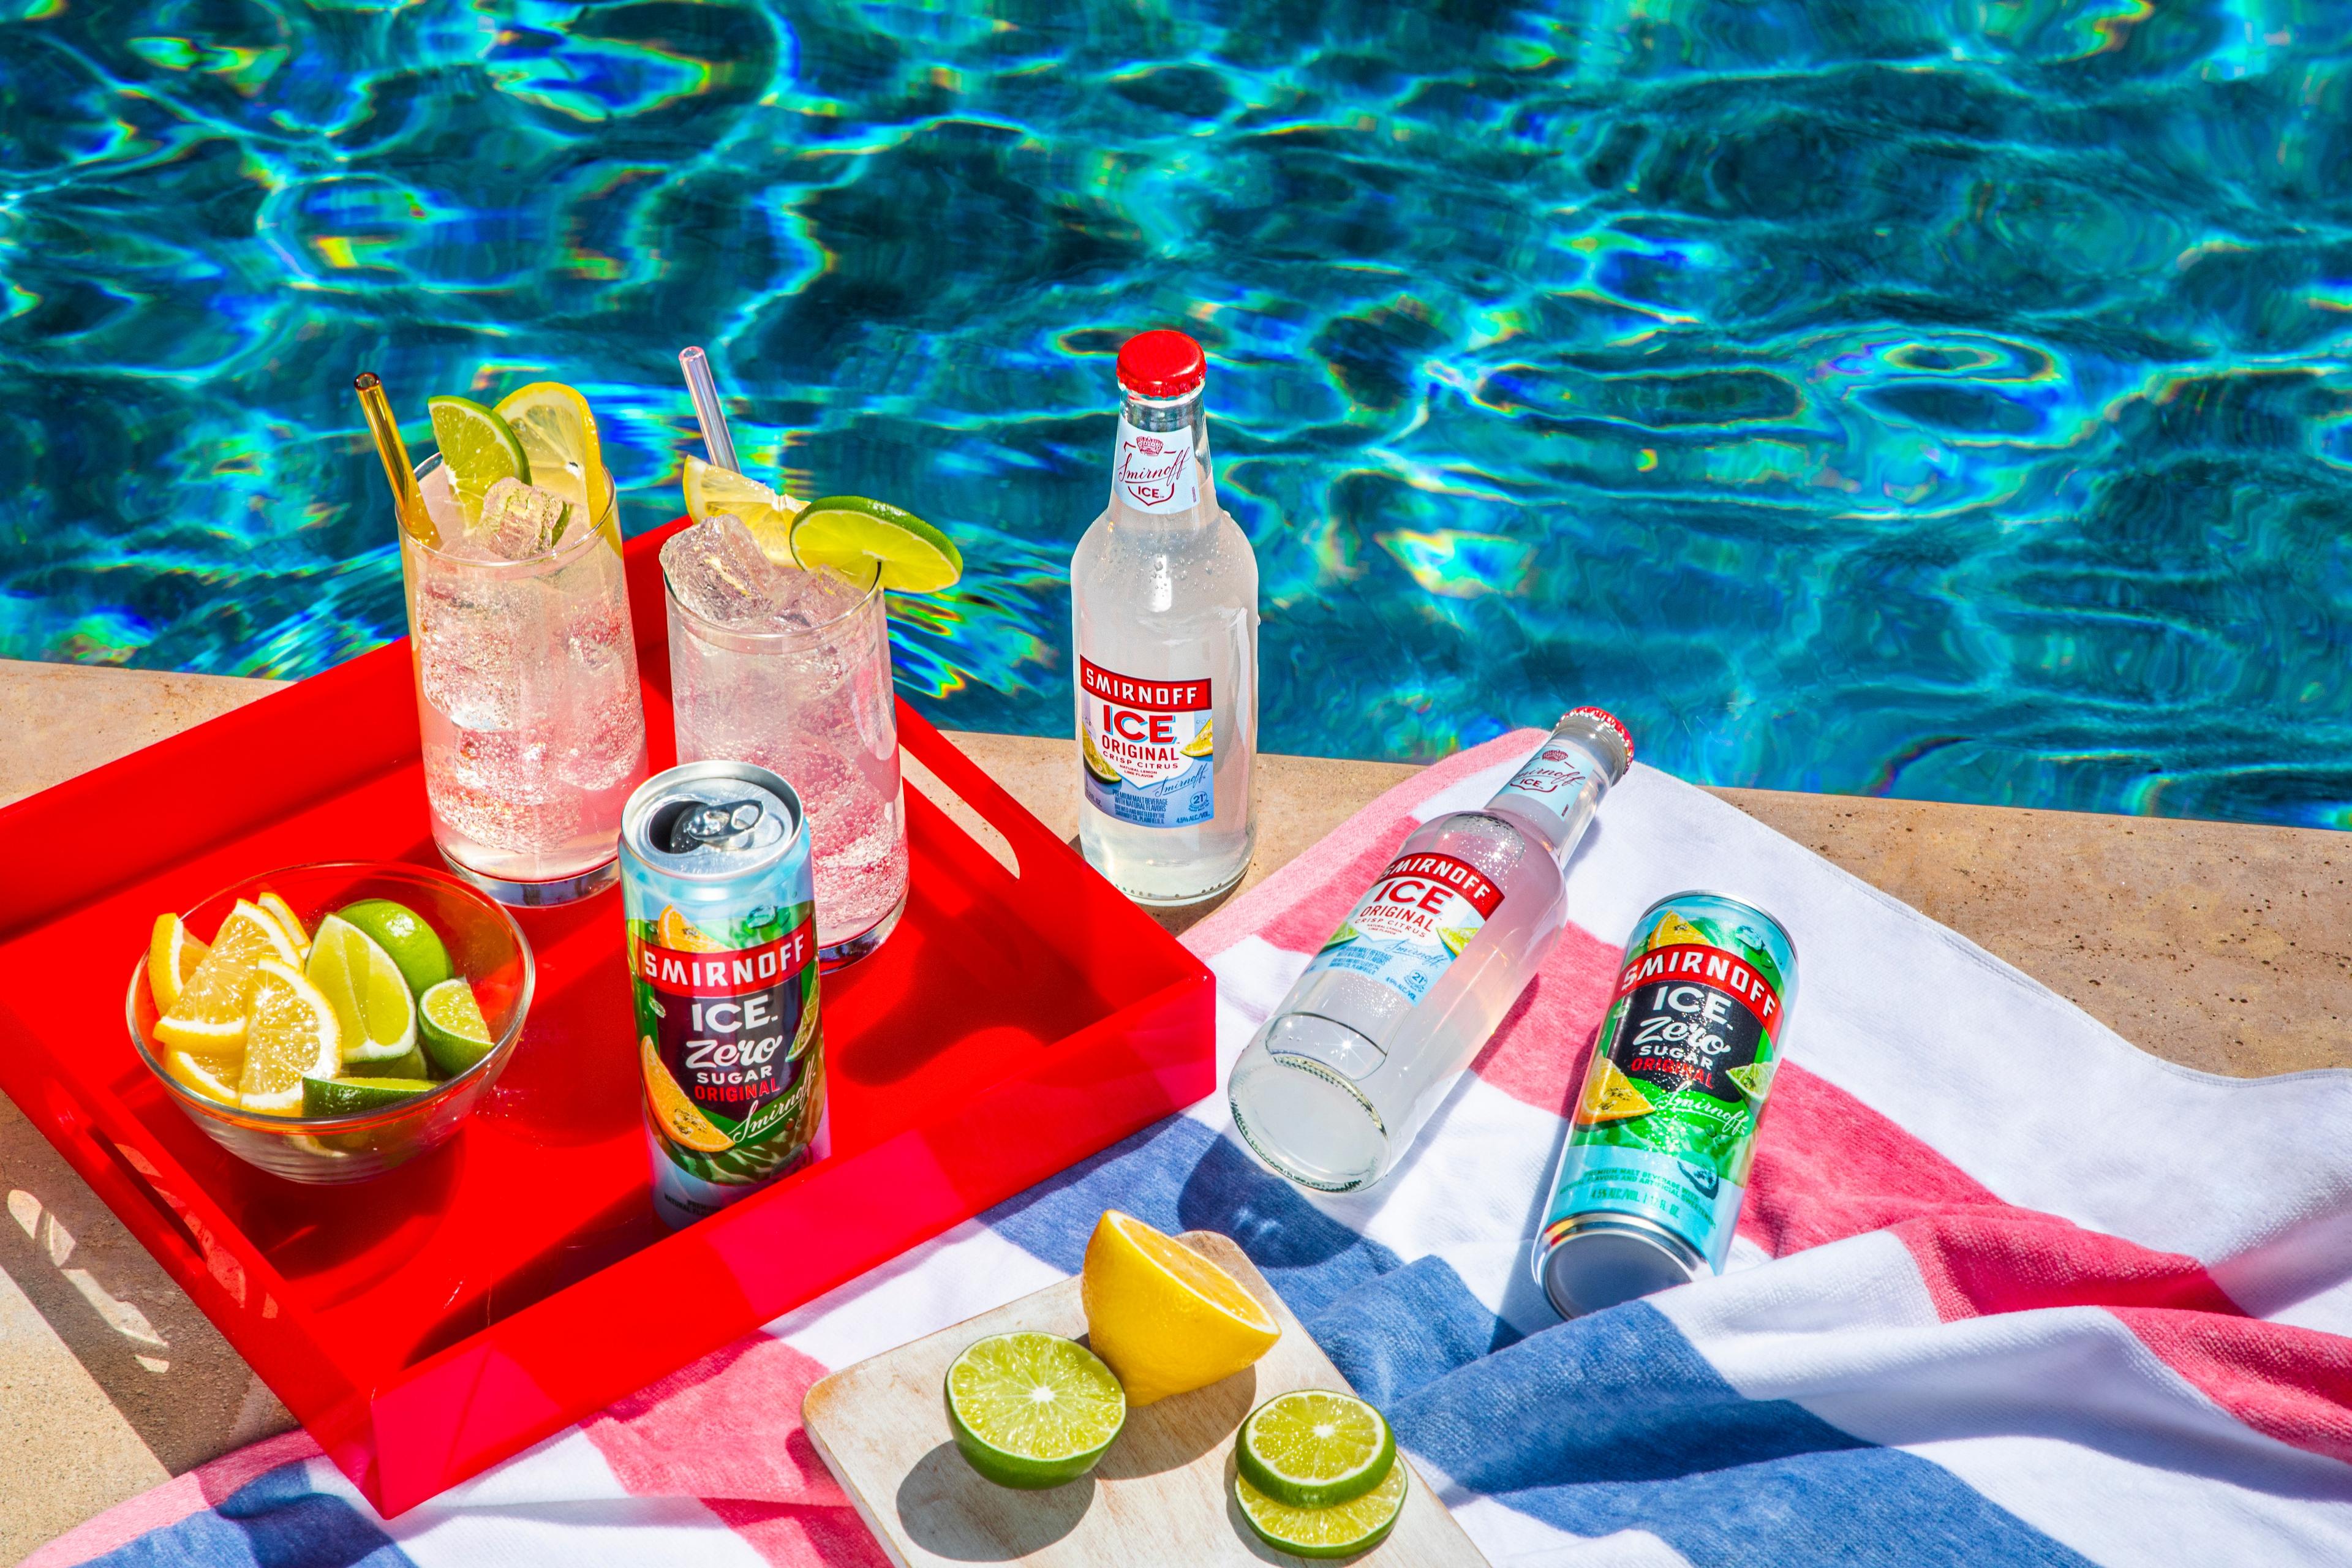 Smirnoff Ice by a pool